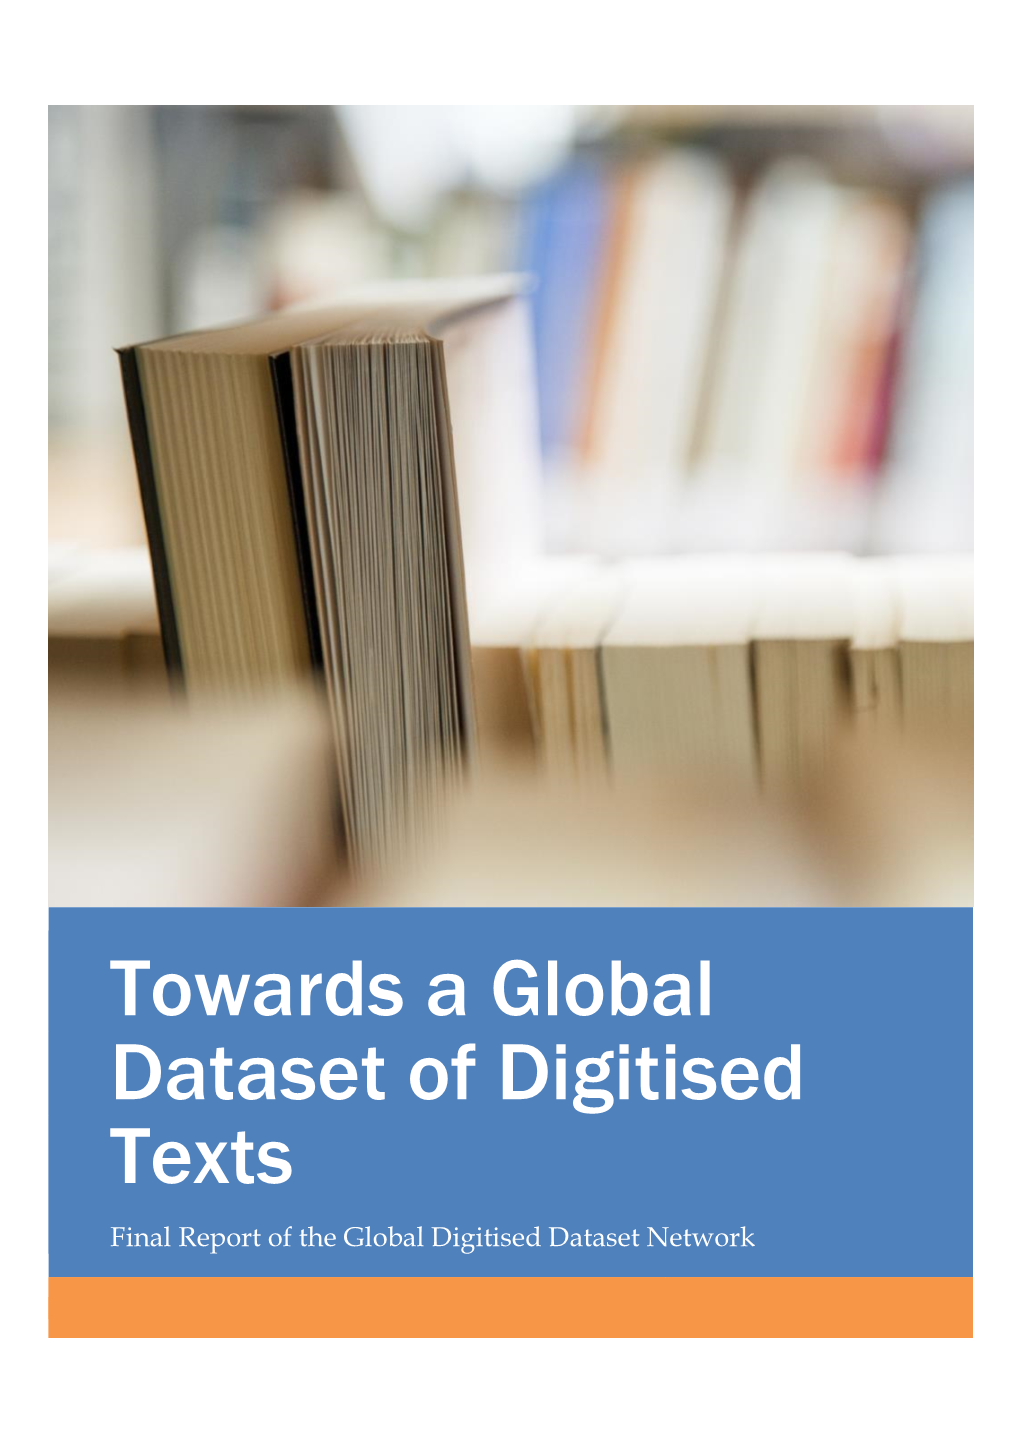 Towards a Global Dataset of Digitised Texts